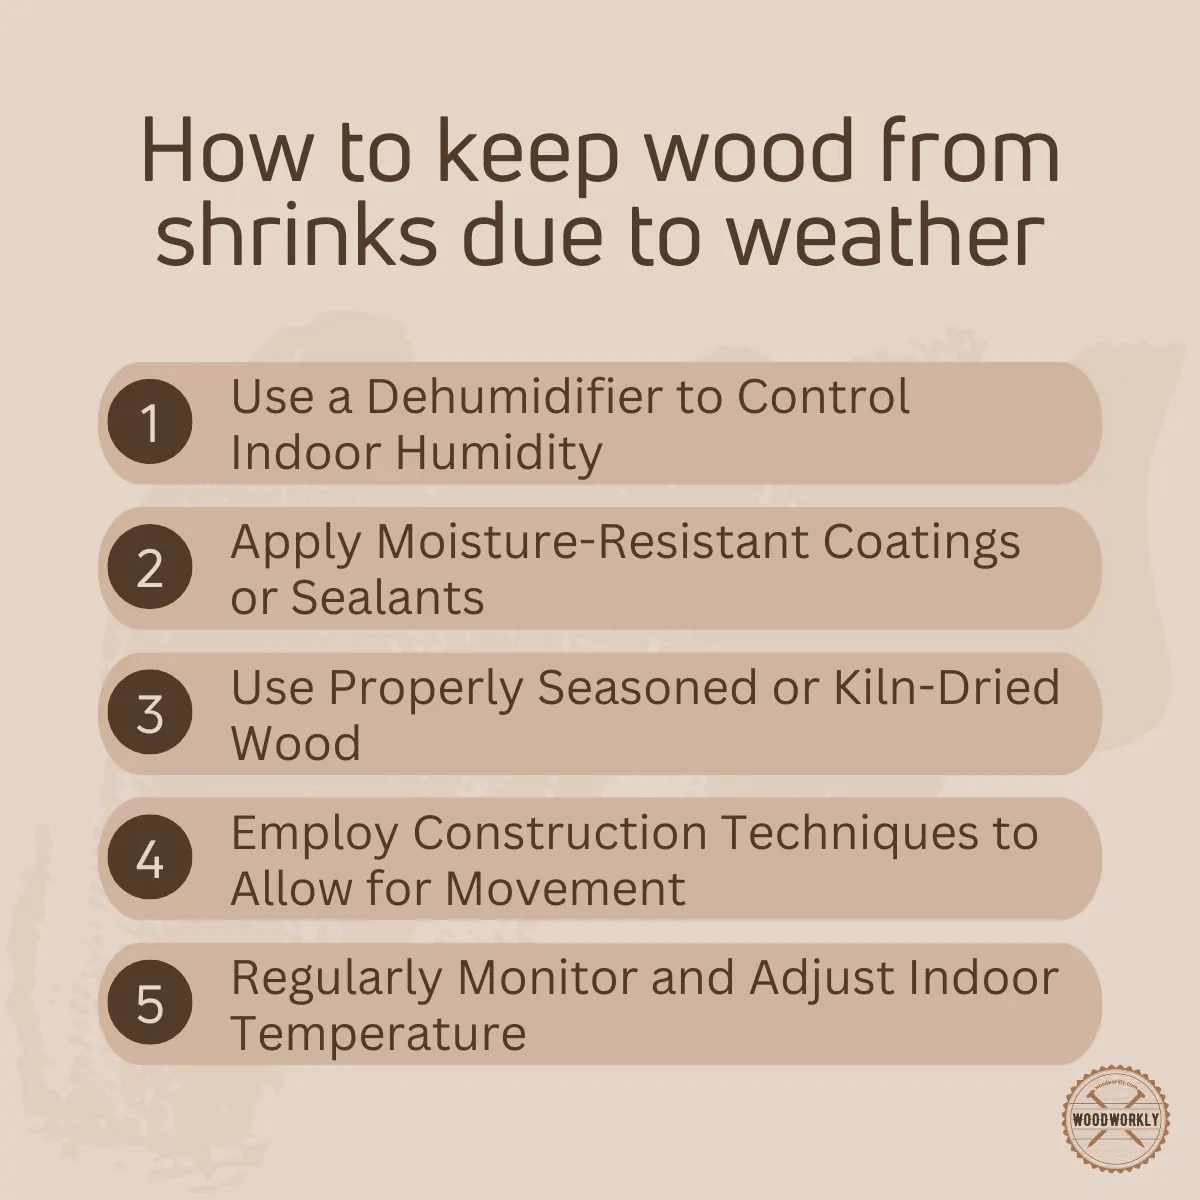 How to keep wood from shrinks due to weather